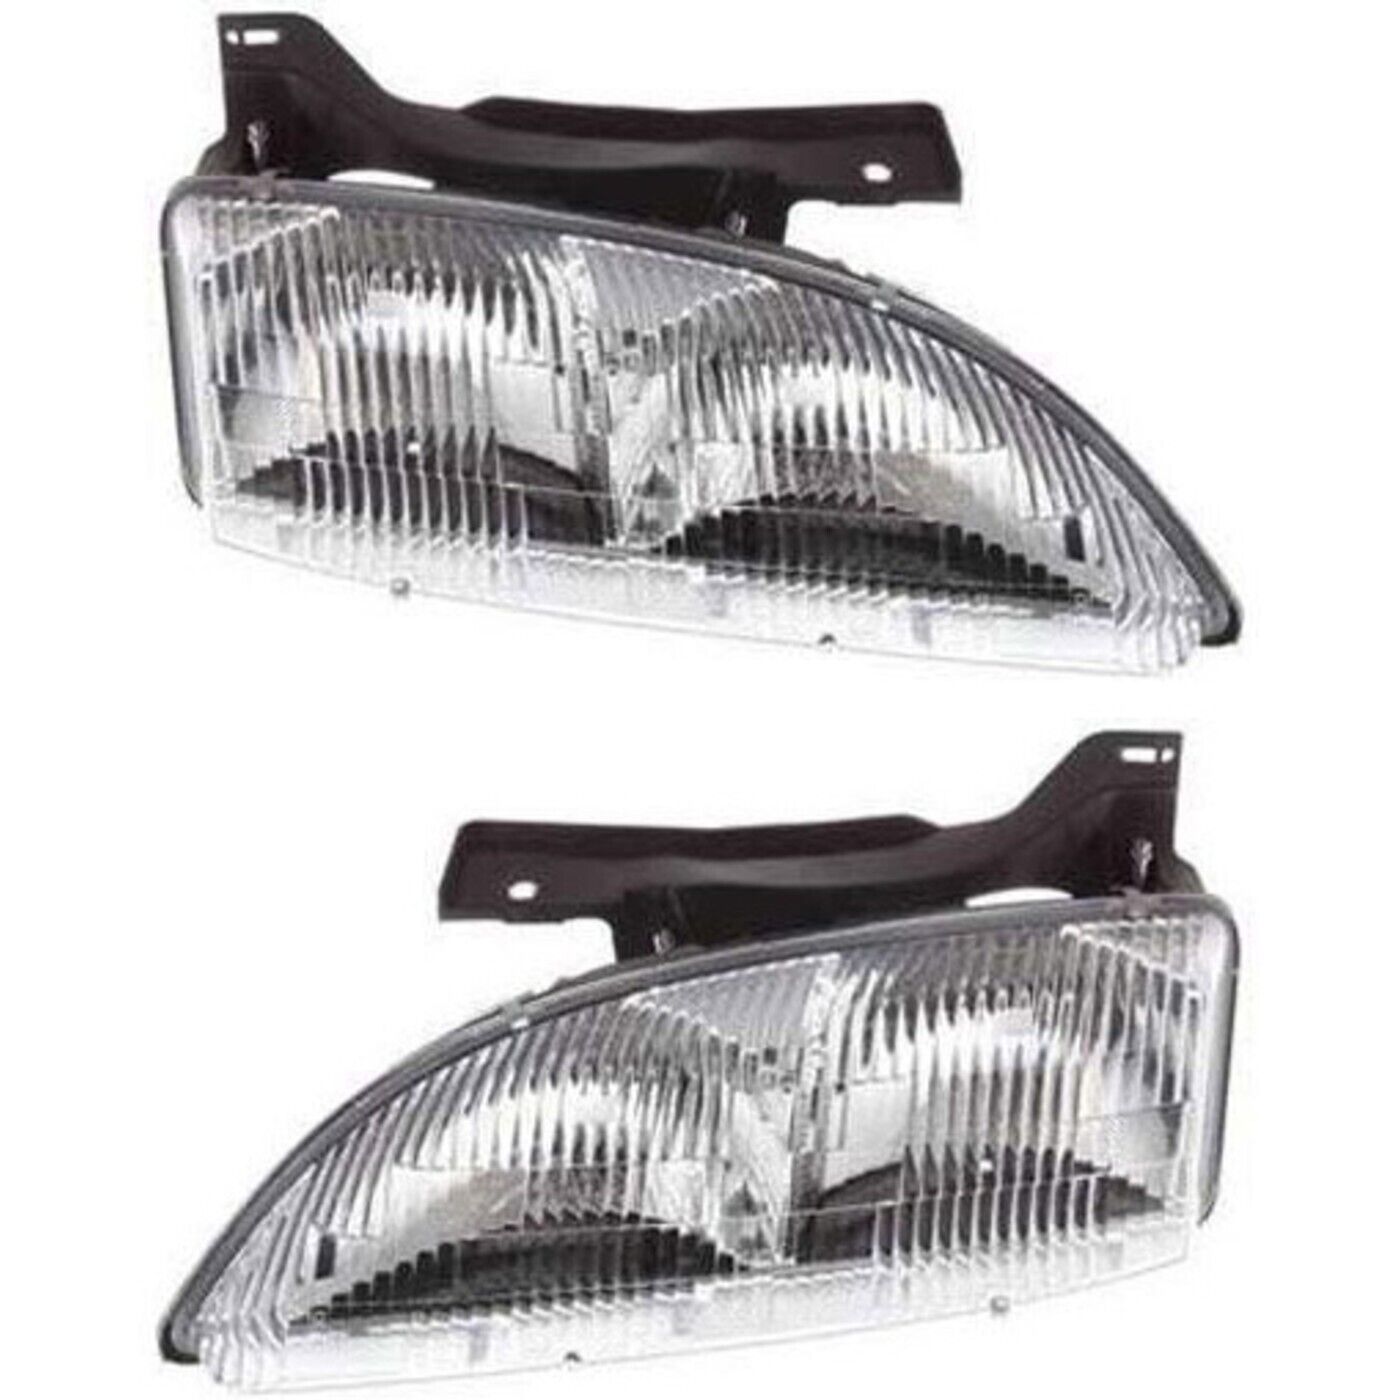 Headlights Headlamps Left & Right Pair Set NEW for 95-99 Chevy Cavalier